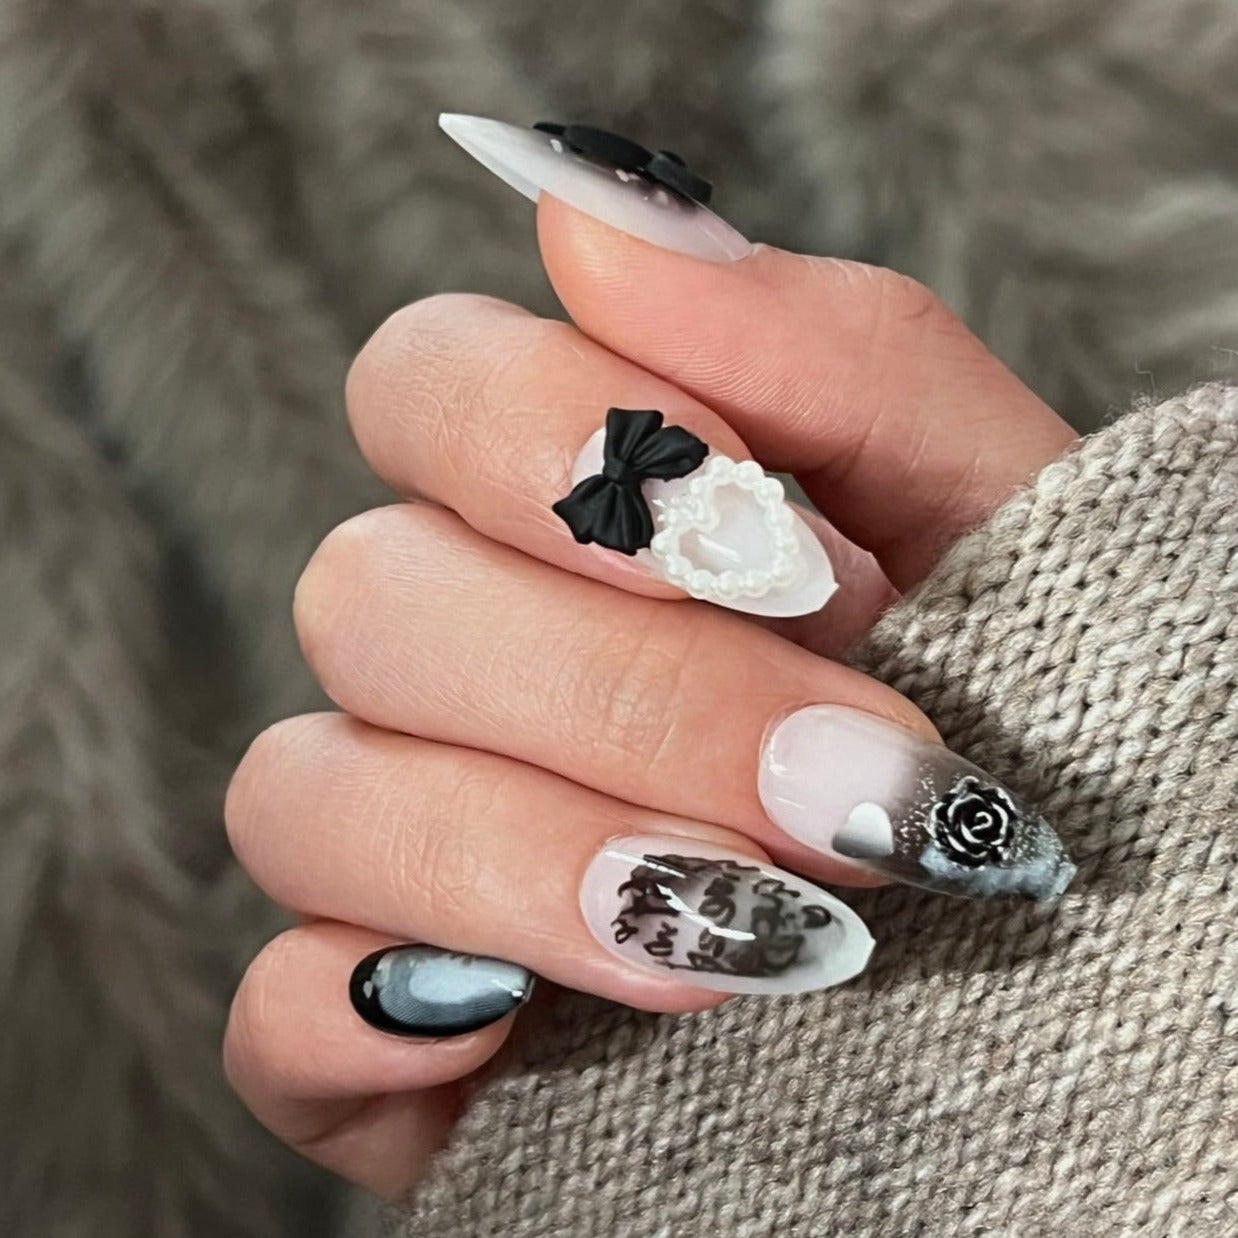 Black and White Almond Nails | Stylish Almond Nails | Galspro